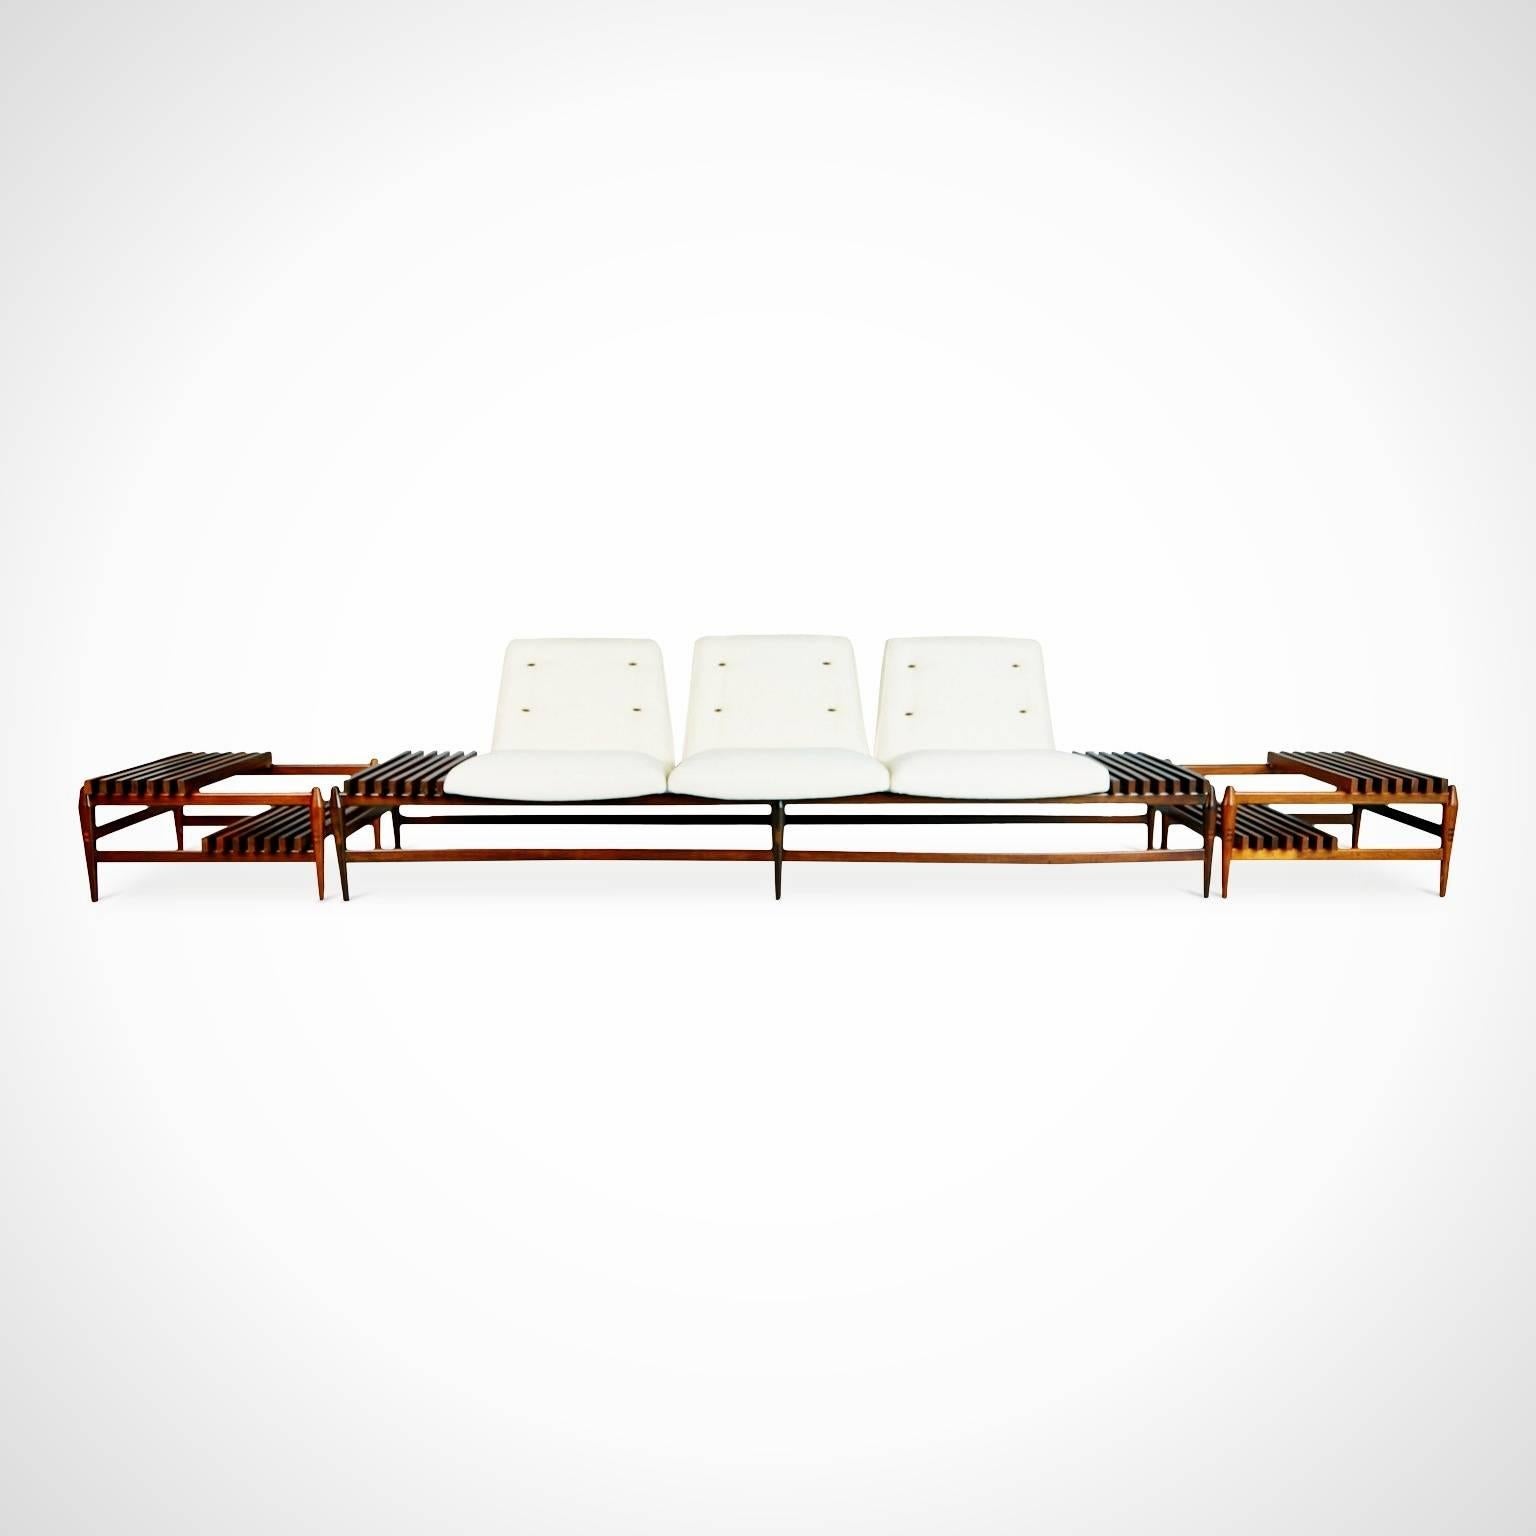 Newly imported and restored from a private collector in Brazil, this one of a kind sofa and two matching side tables were created by the Liceu de Artes e Ofícios de São Paulo and encapsulate the quality and innovation of the school's designs.